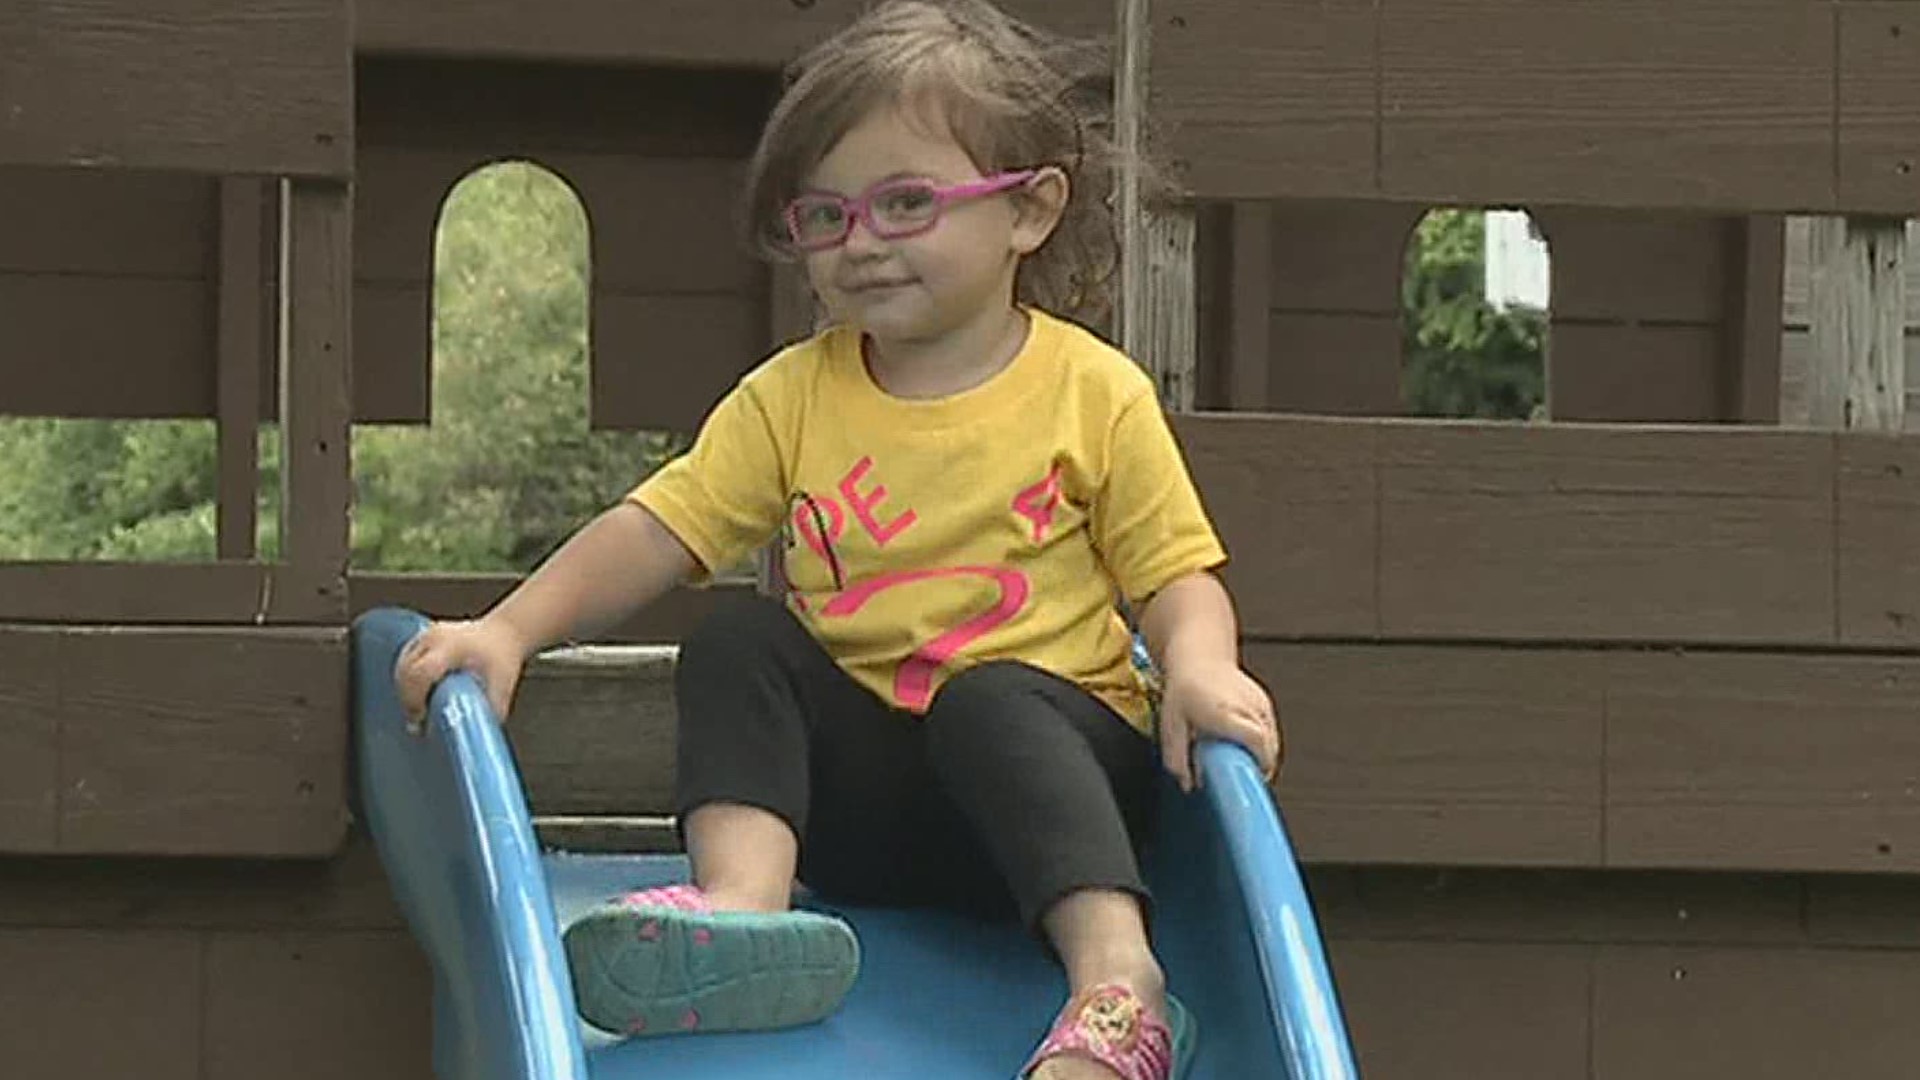 Two-year-old Celia has been dealing with high fevers, rashes, joint pain, and eyesight problems. Her doctors have yet to pinpoint the cause for her symptoms.